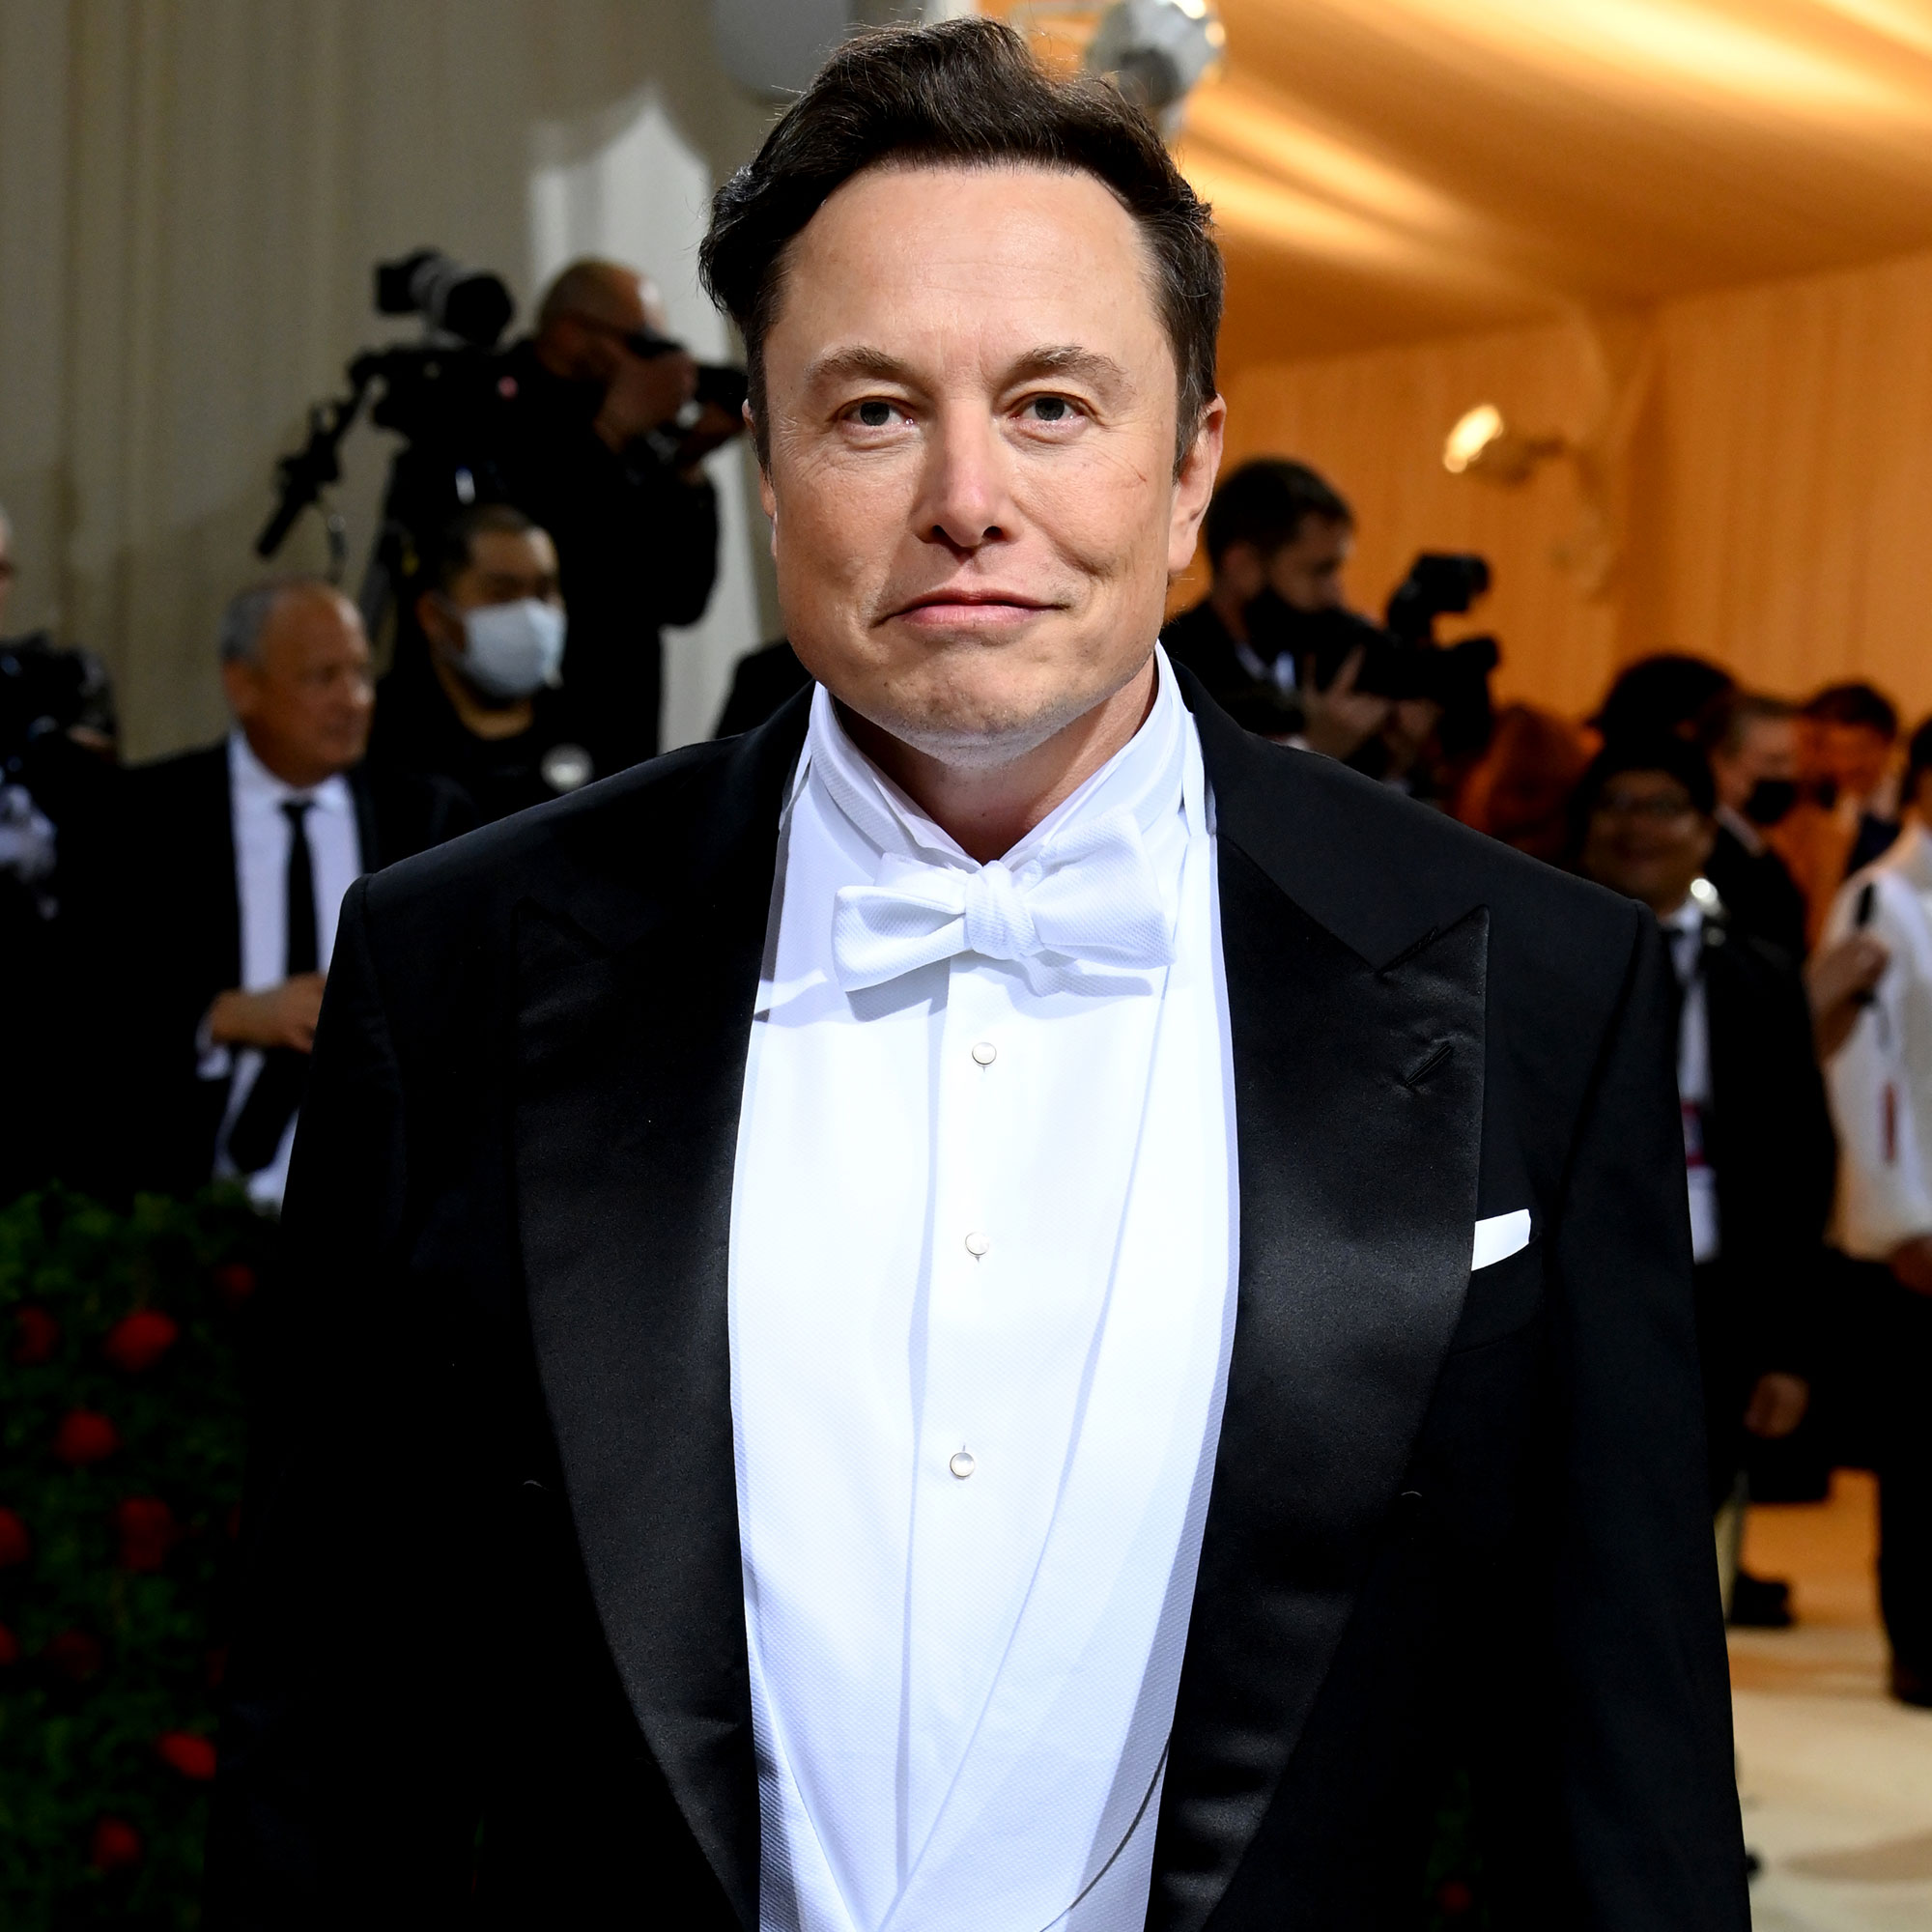 Elon Musk Reacts to Sexual Misconduct Allegation: Details